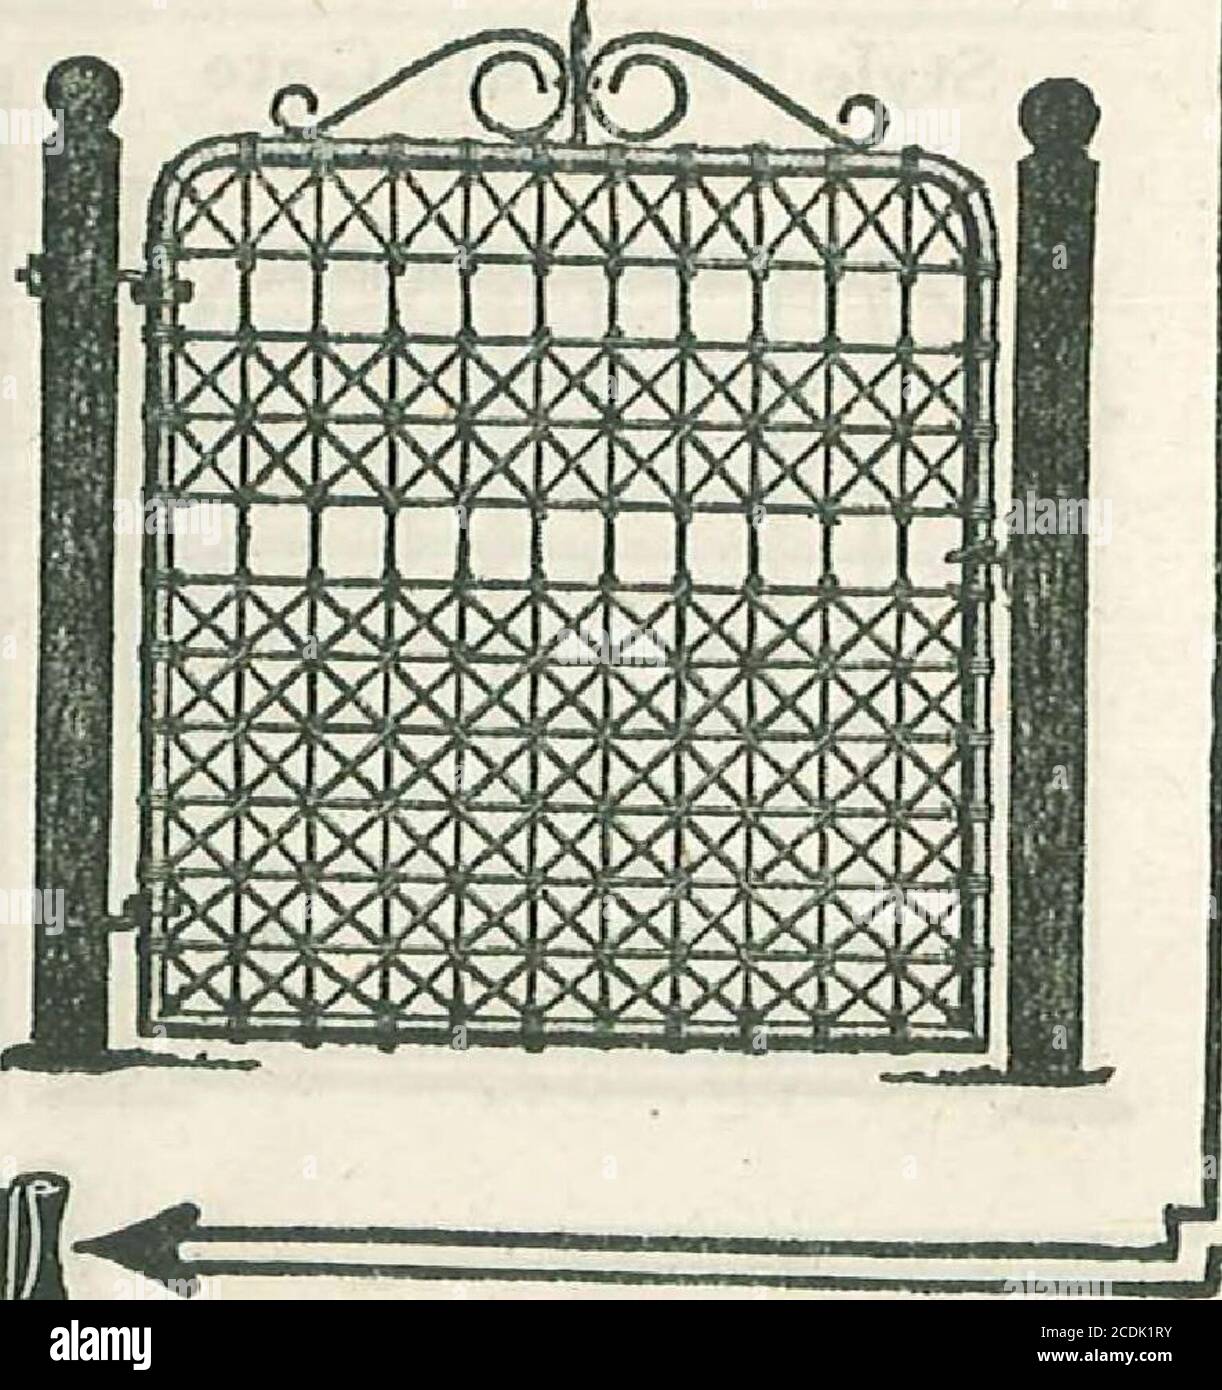 . Here's Jim Brown with a load of summer and fall bargains : fencing, gates, steel posts, ready-roofing and paint . Triple Galvanized Walk Gates Close Mesh for Poultry Width Height WithFittlng. | WithMtttna.  for for2or3lWood Pacta I Steel Po»t» -STYLE C -..-.. 3Ht.x42or48in.4 ft.x48or54in.4 ft. x58in. $2.35 $3.102.60 3.352.75 3.50 STYLE tfCC 3Ht-x42or48in.4 ft.x48or.54in.4 ft. x58 in. $2.75 $3.503.00 3.753.15 3.90 PAGE 74 Style CC Walk Gate |DIRECT rnOM FACTORY. (llVB PAV THE TREIGHTl Stock Photo